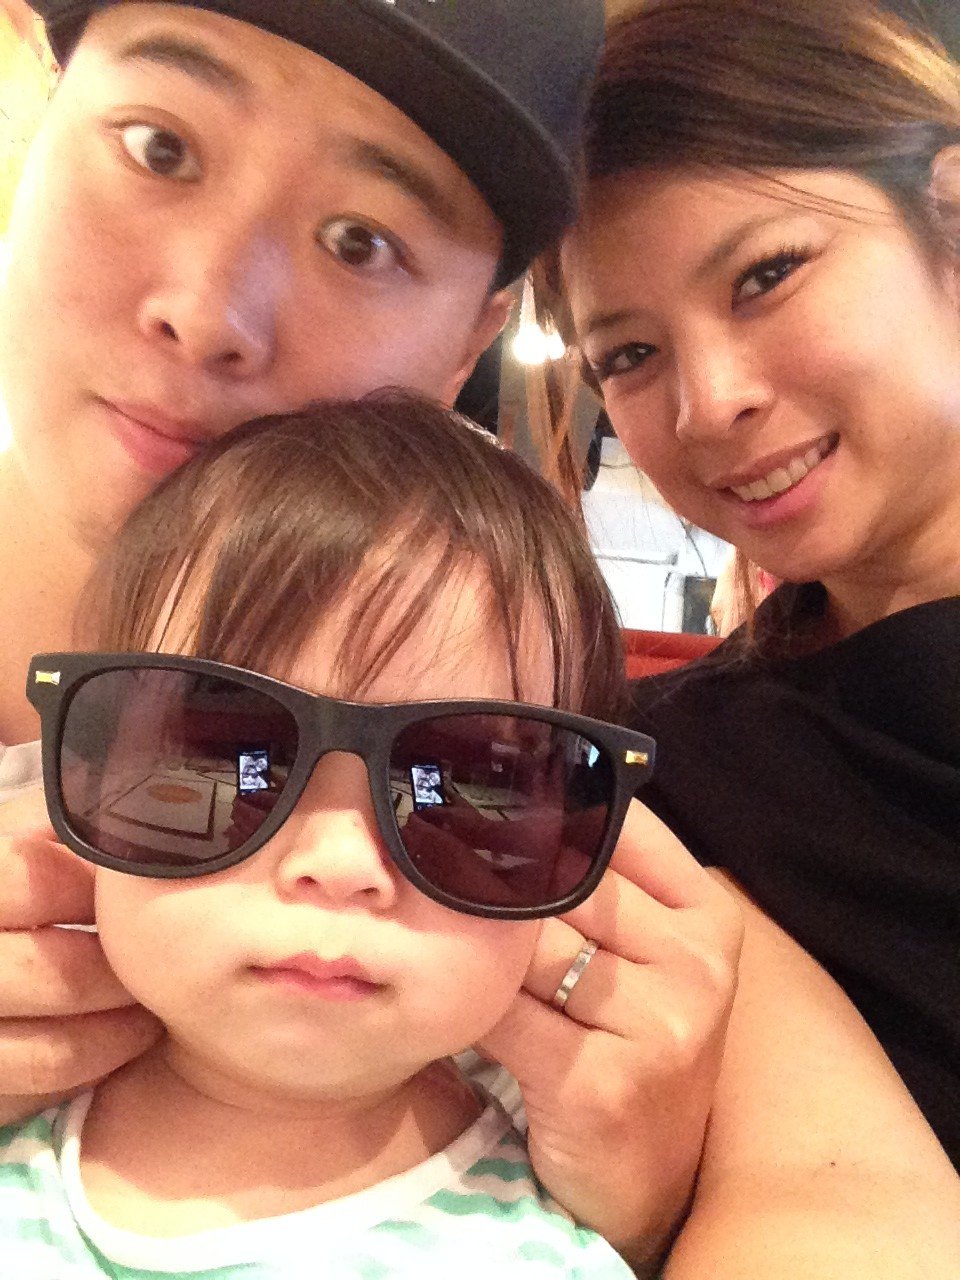 The Wong family